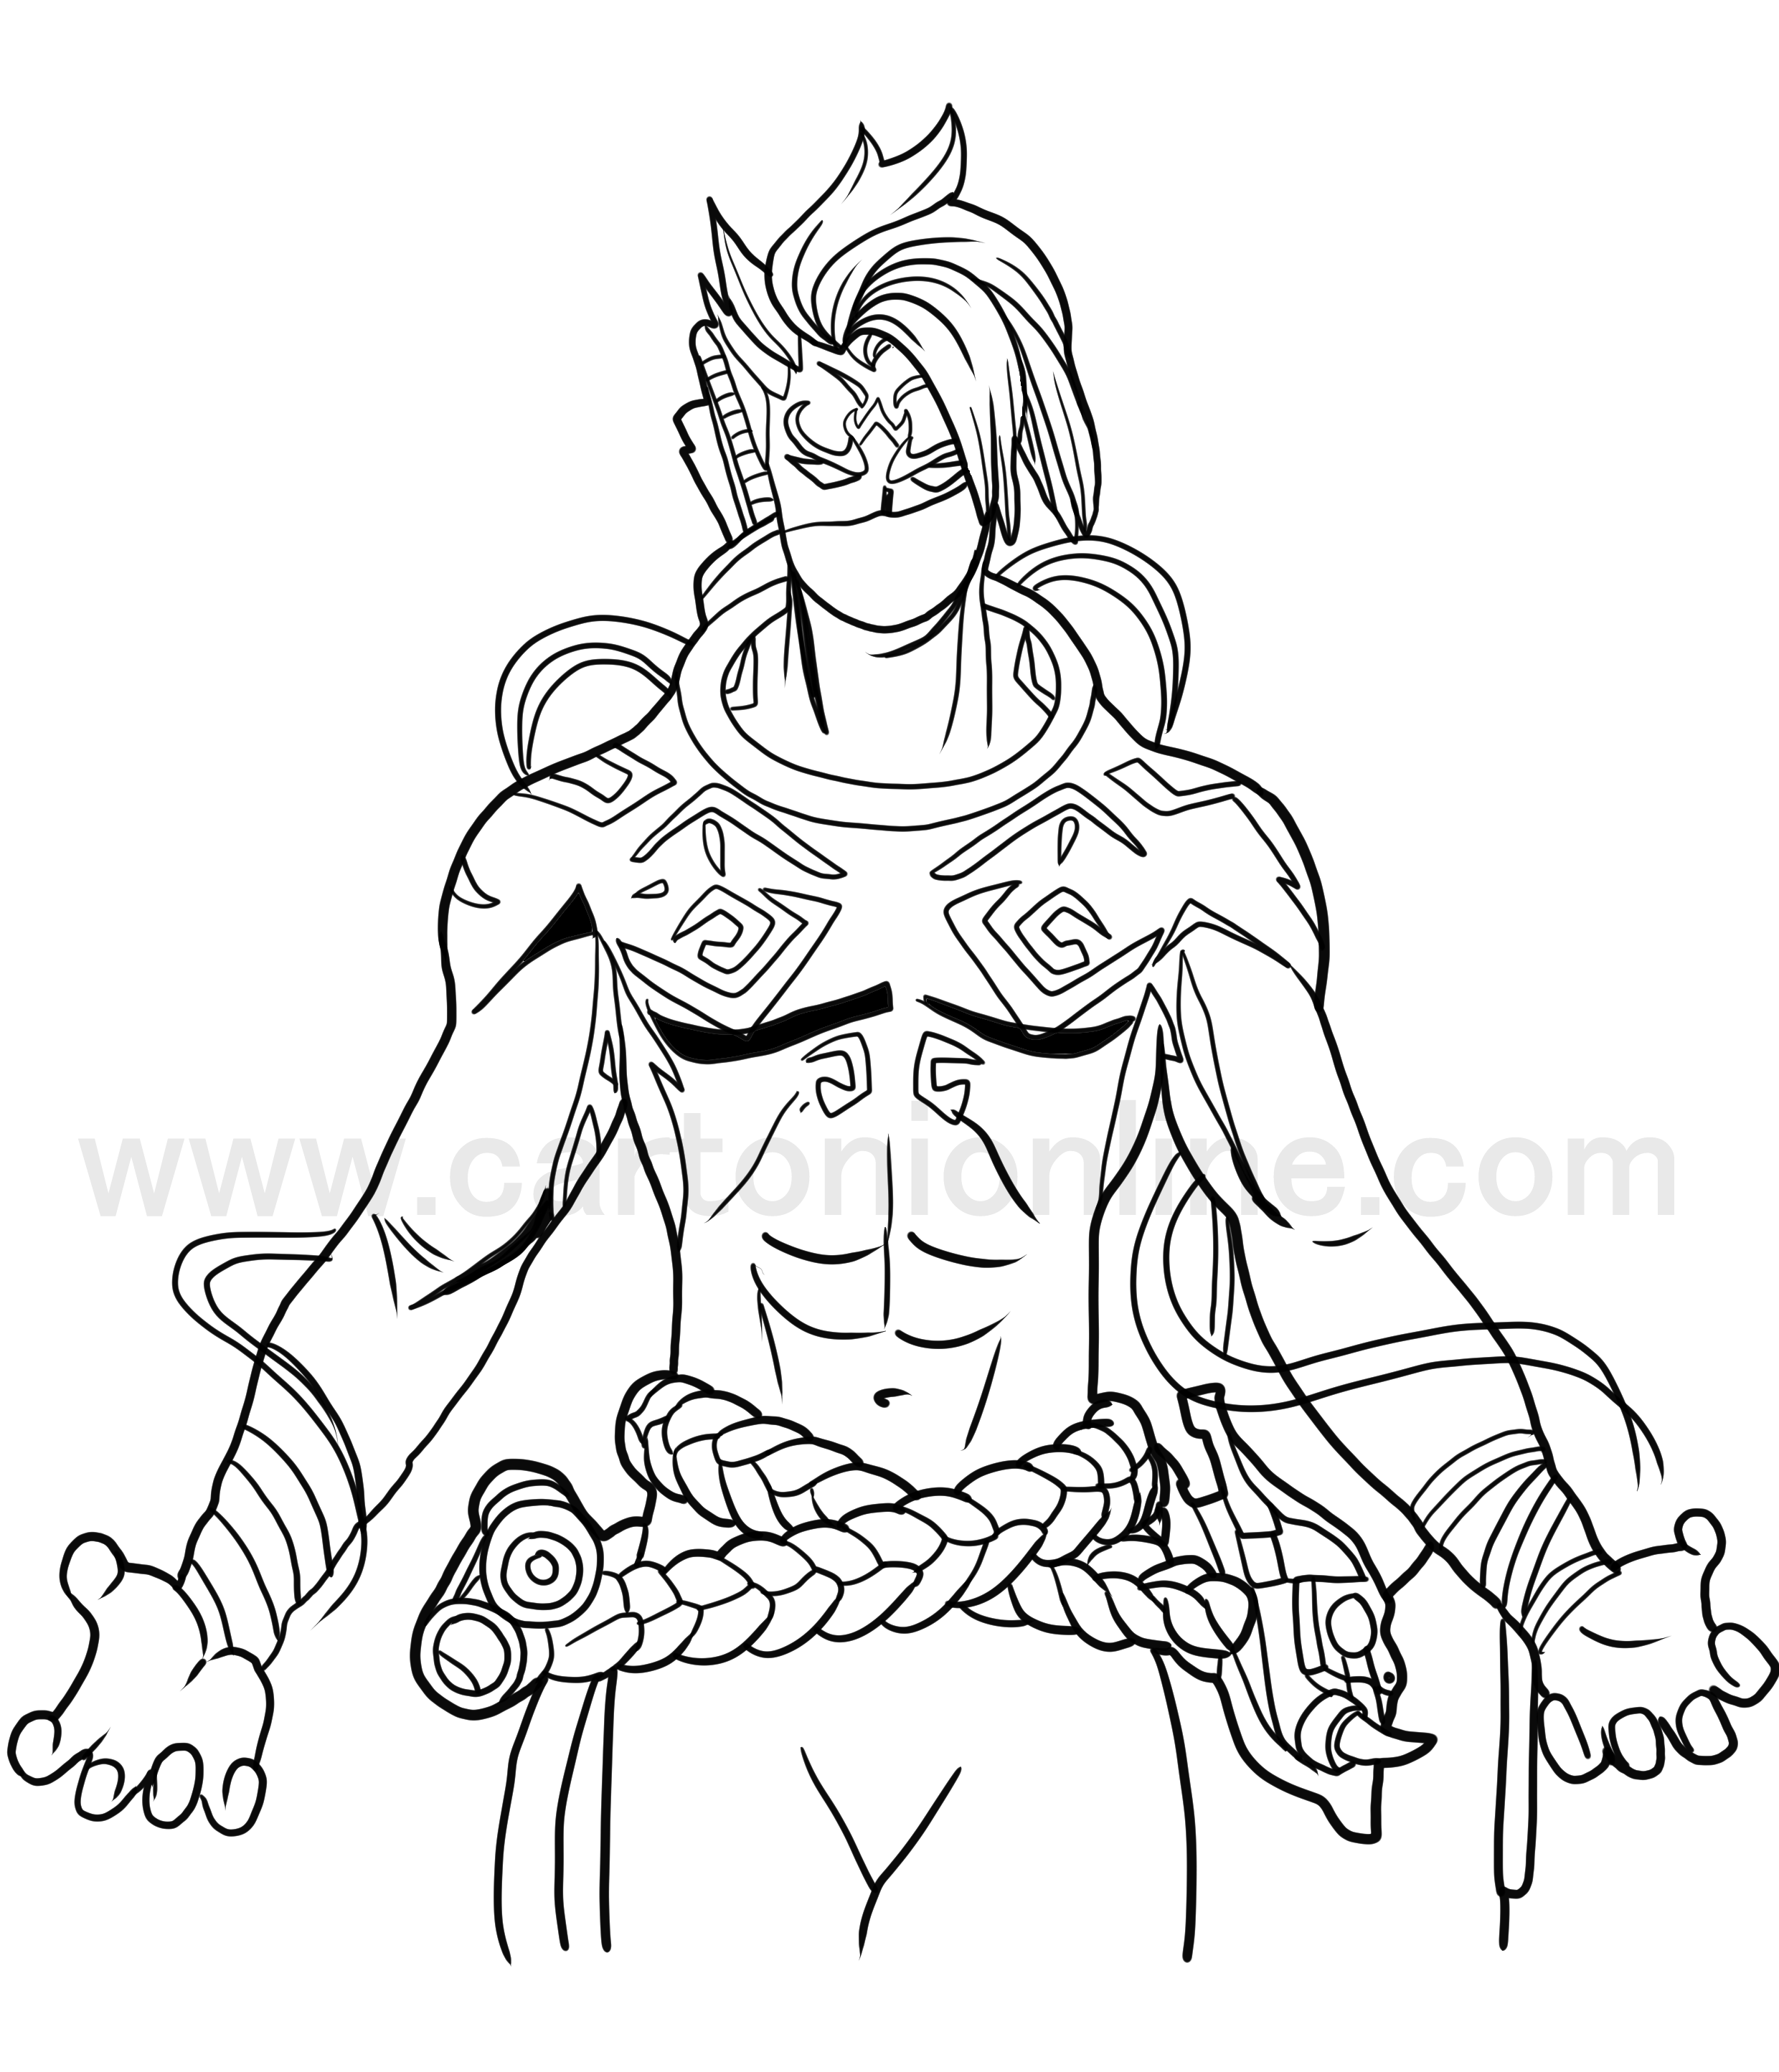 Legendary Raz from Fortnite coloring page to print and coloring